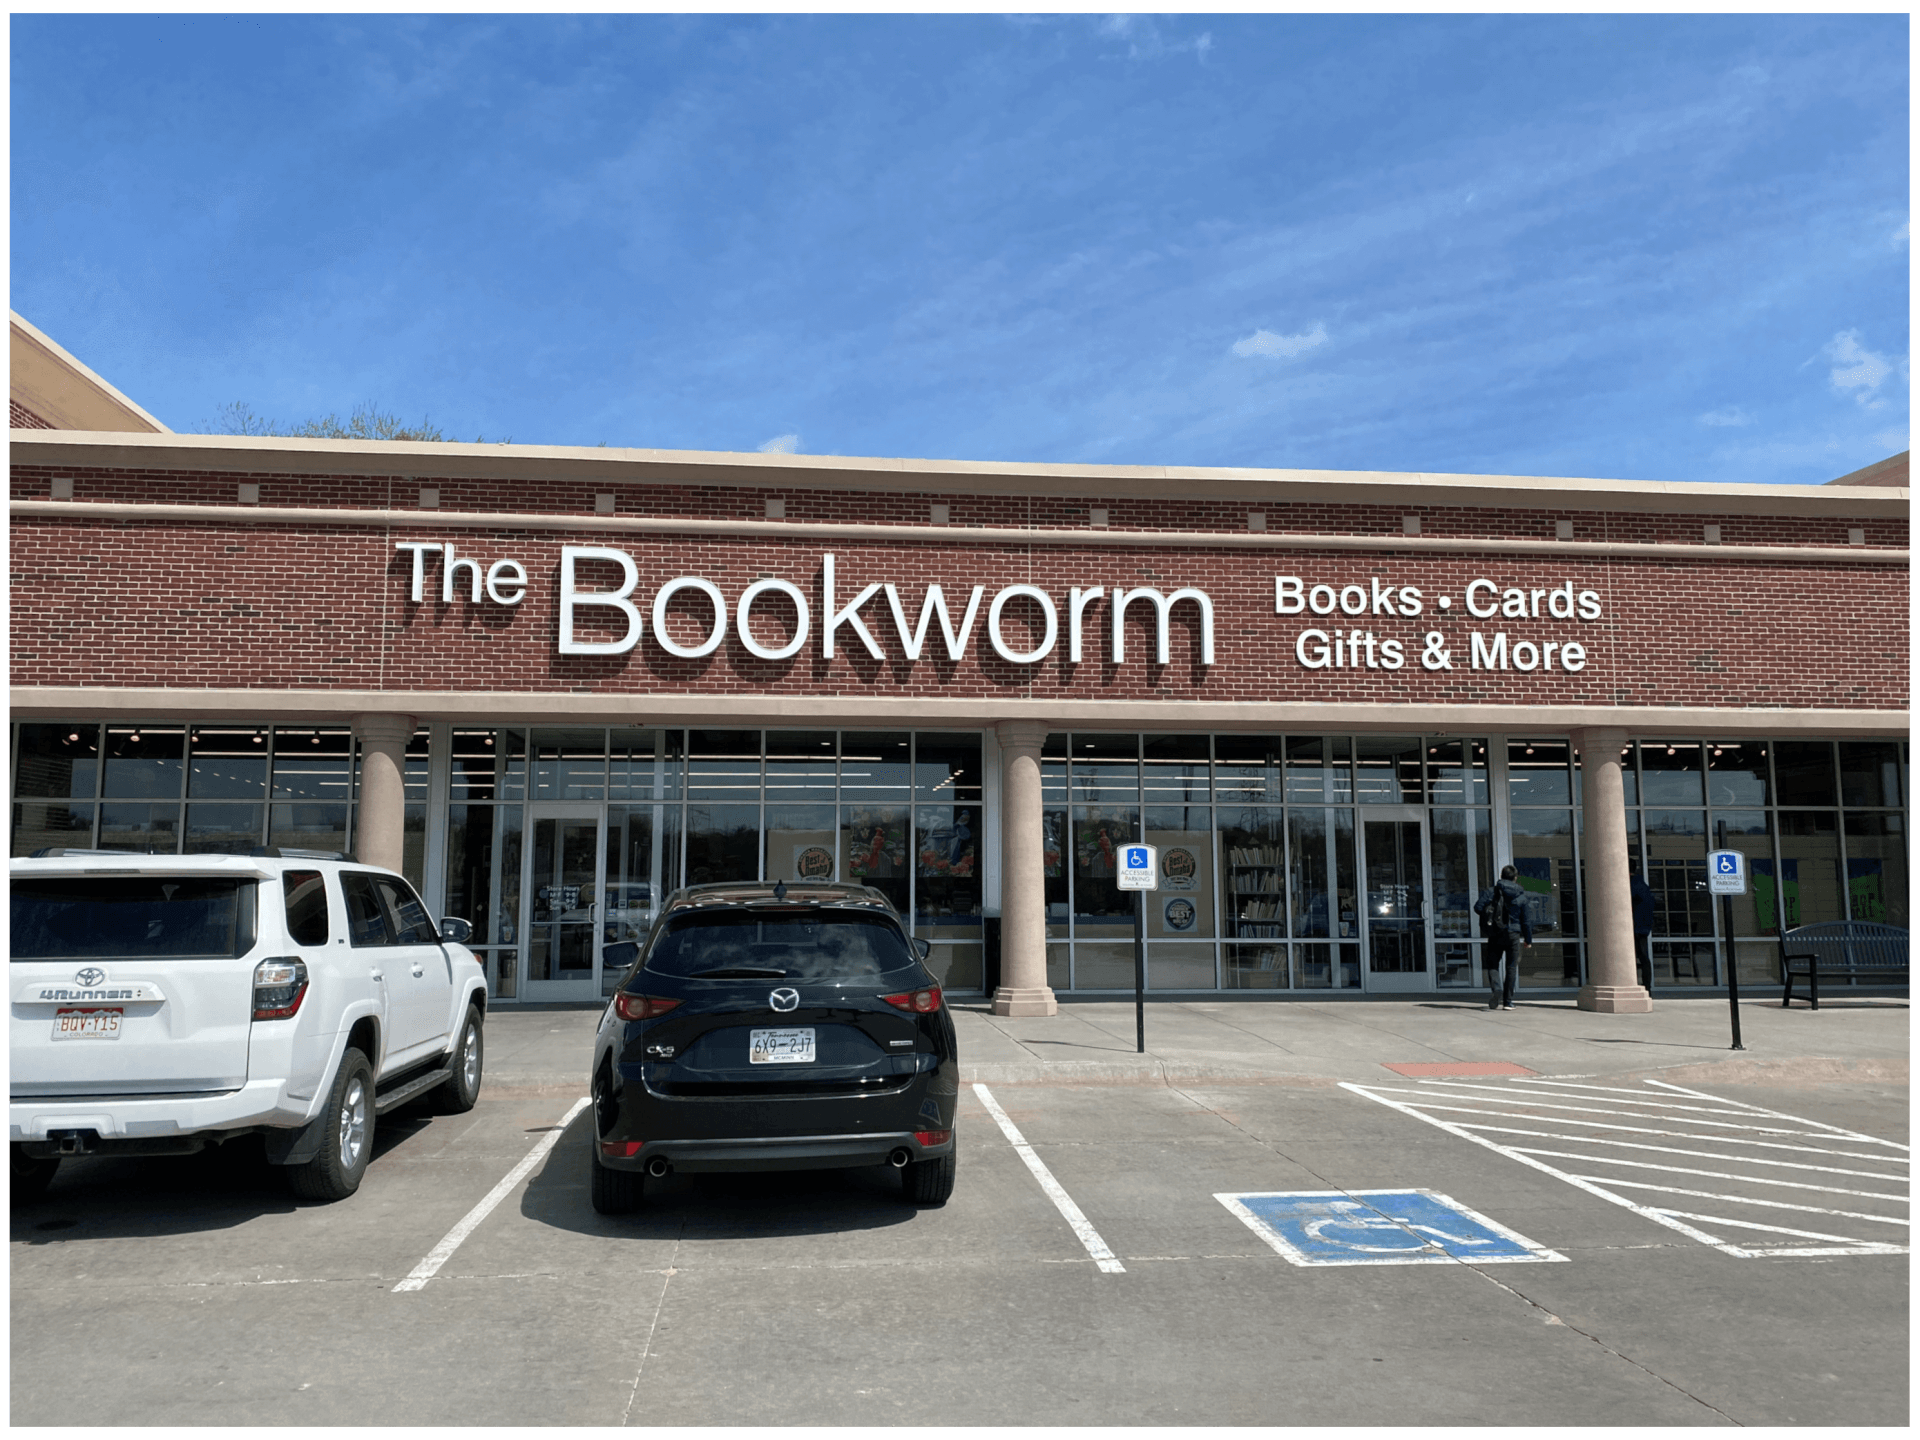 The Bookworm bookstore in Omaha from the outside